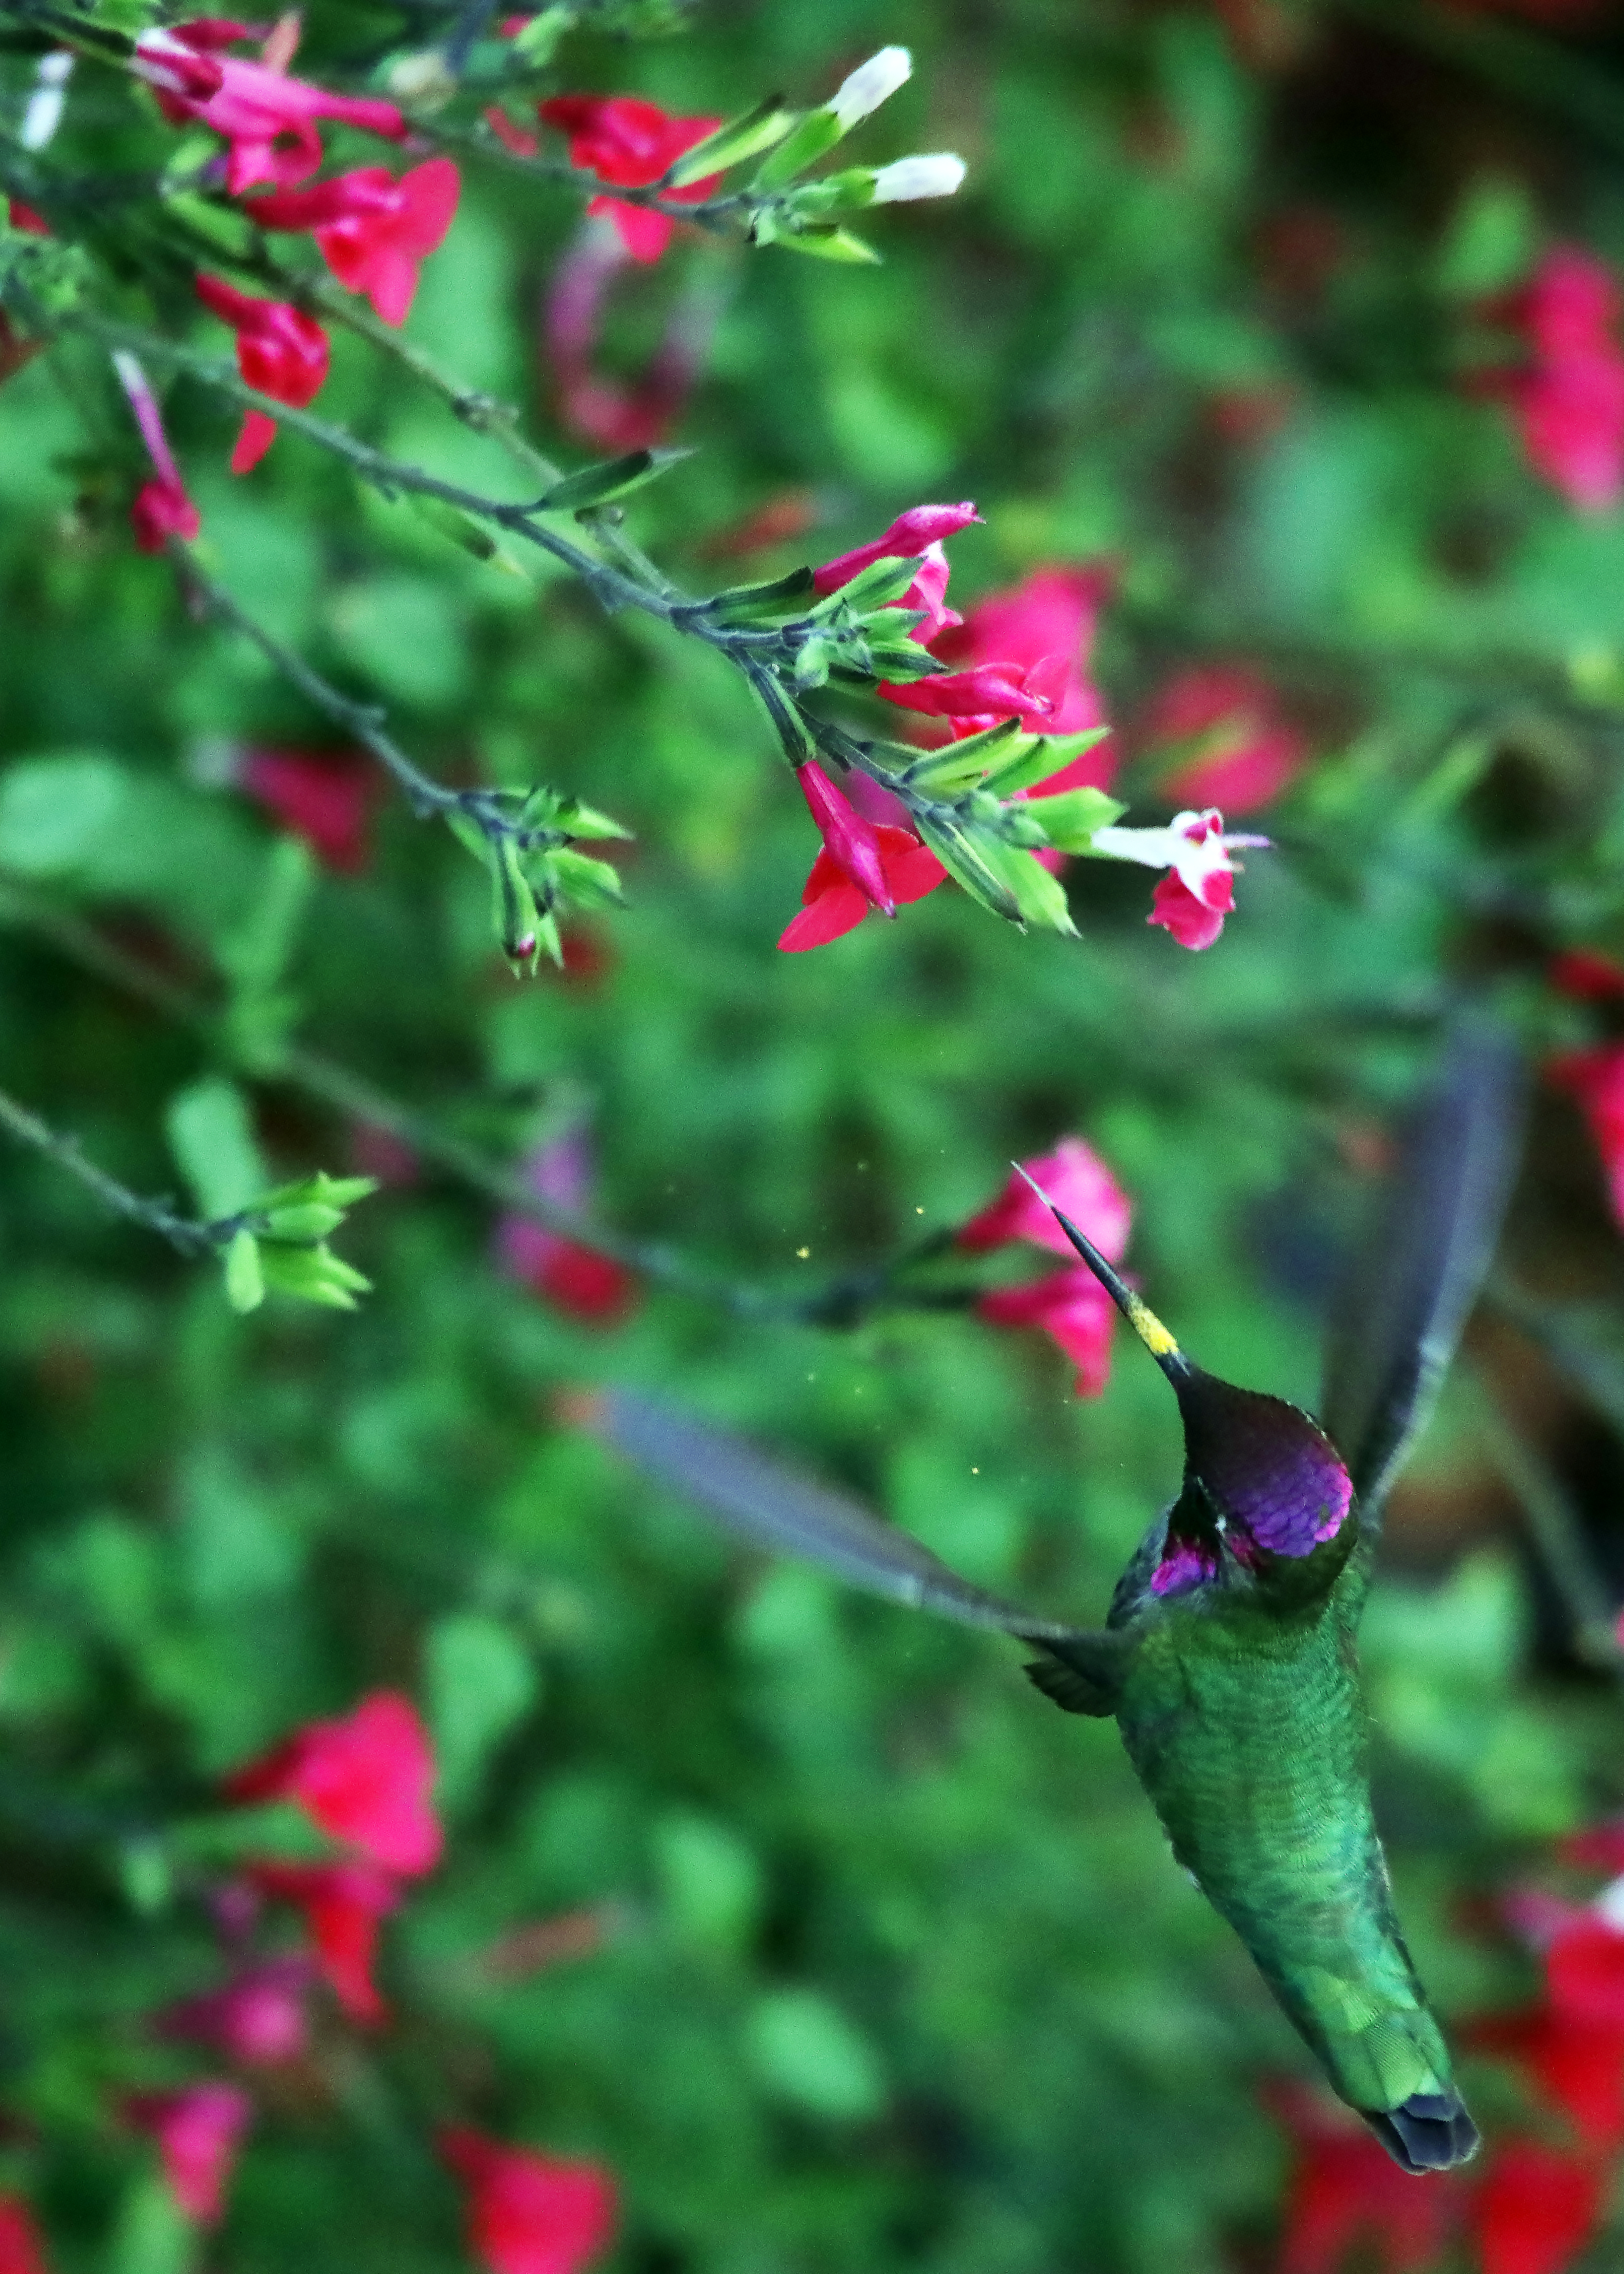  Humming Birds HQ Background Images